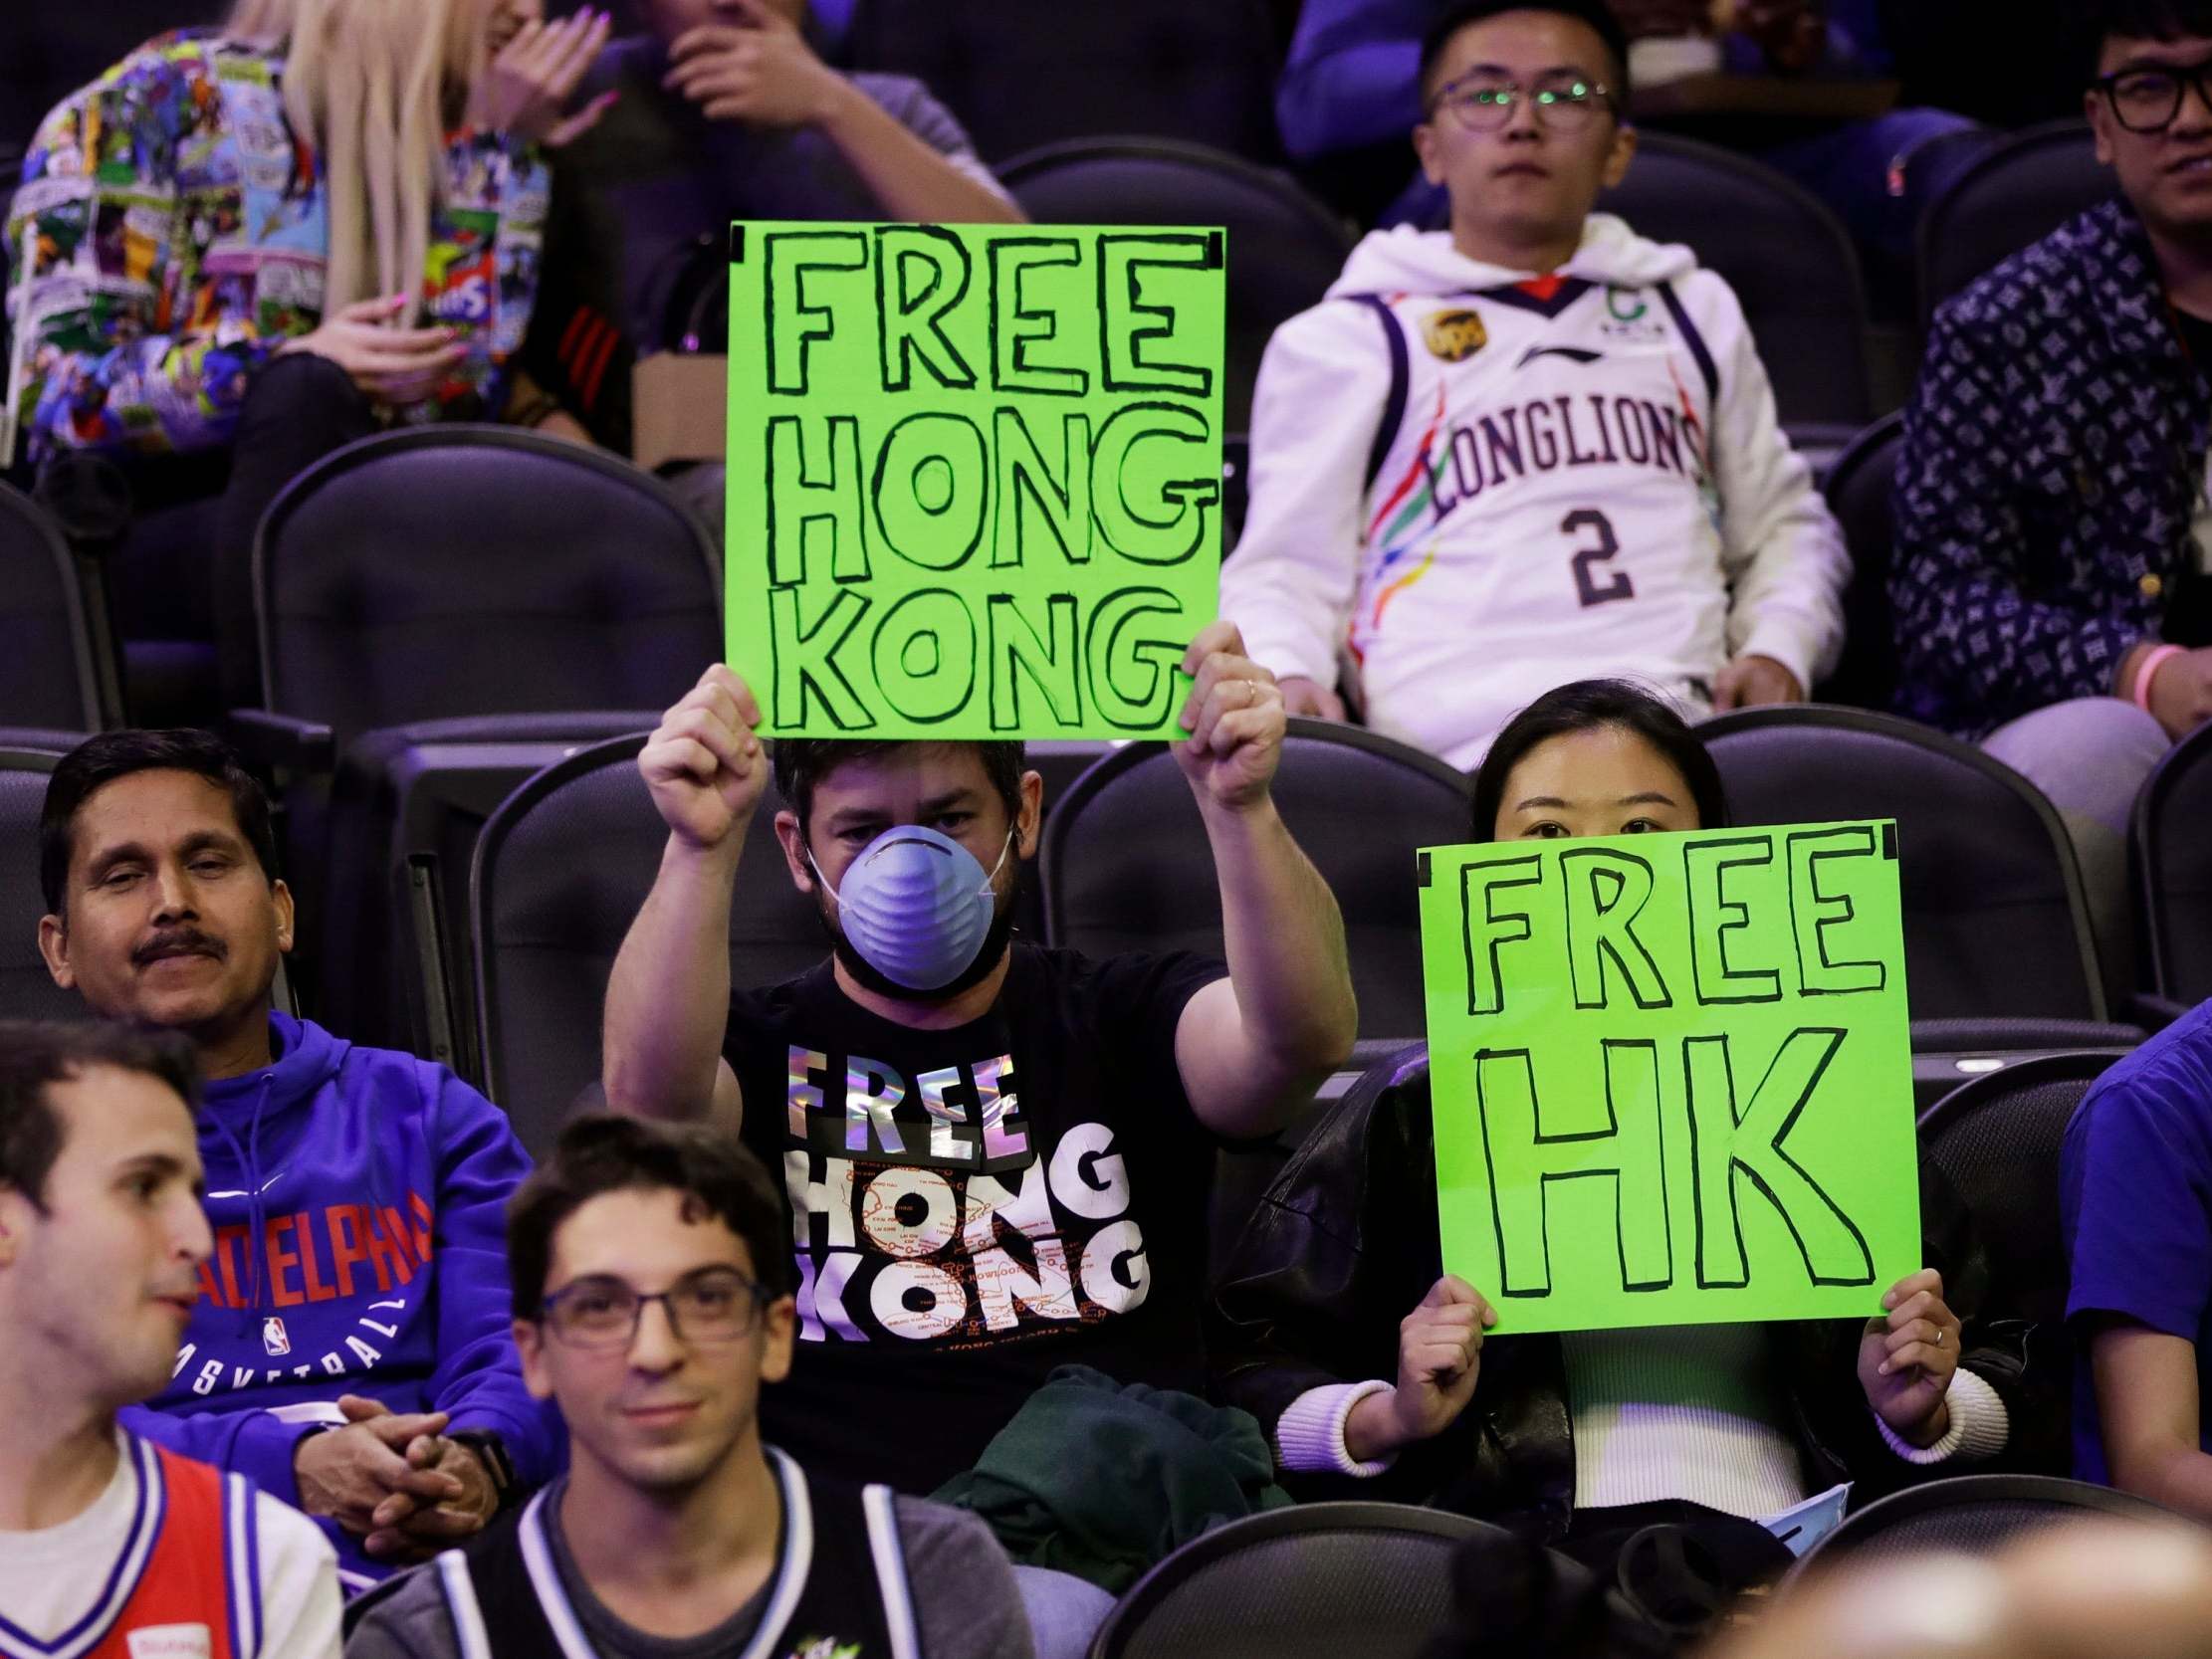 Fans were ejected for showing support towards Hong Kong